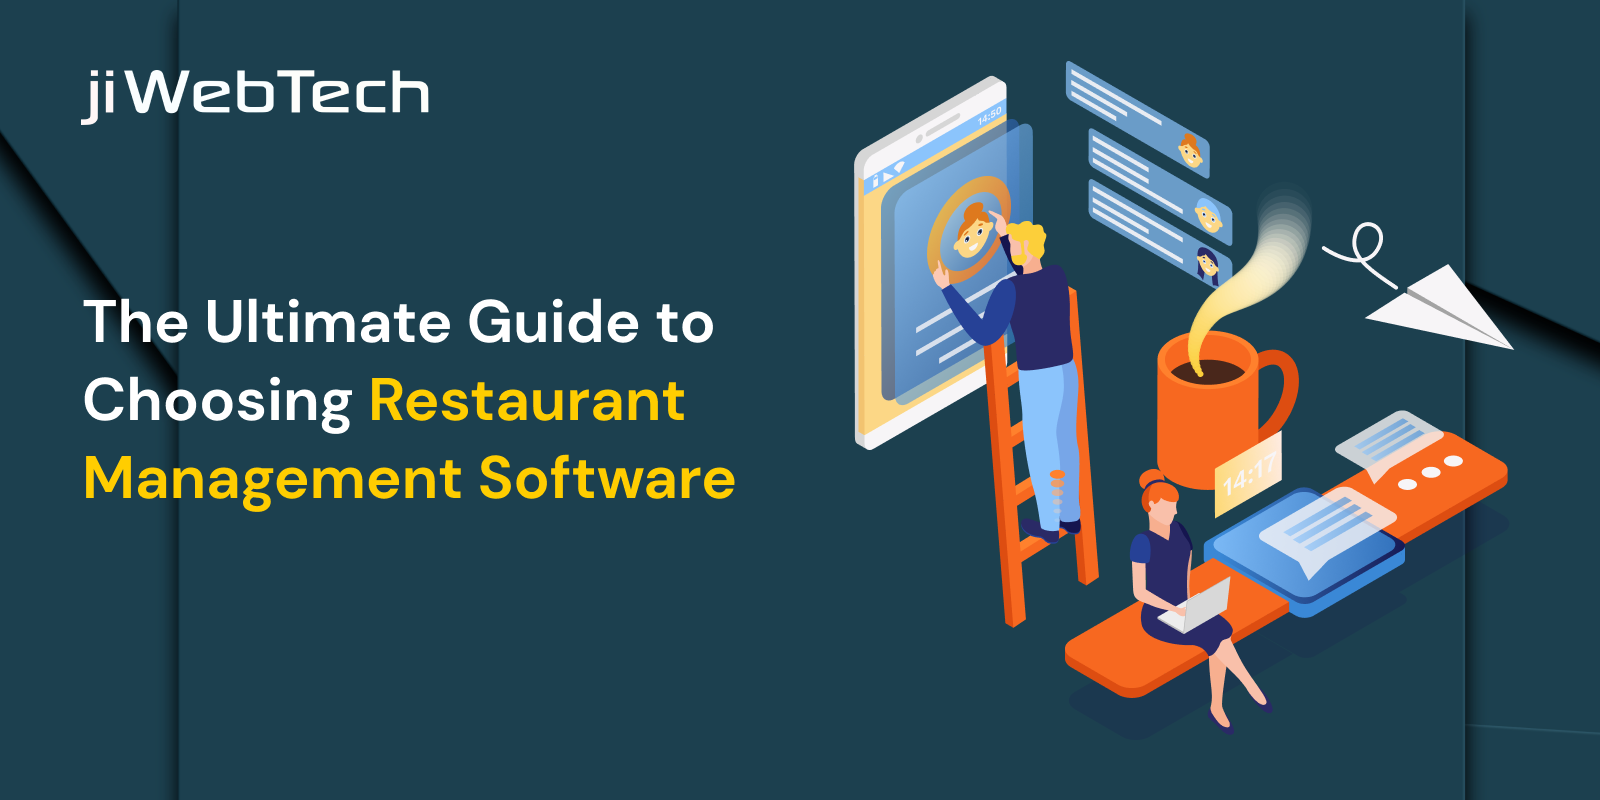 The Ultimate Guide to Choosing Restaurant Management Software